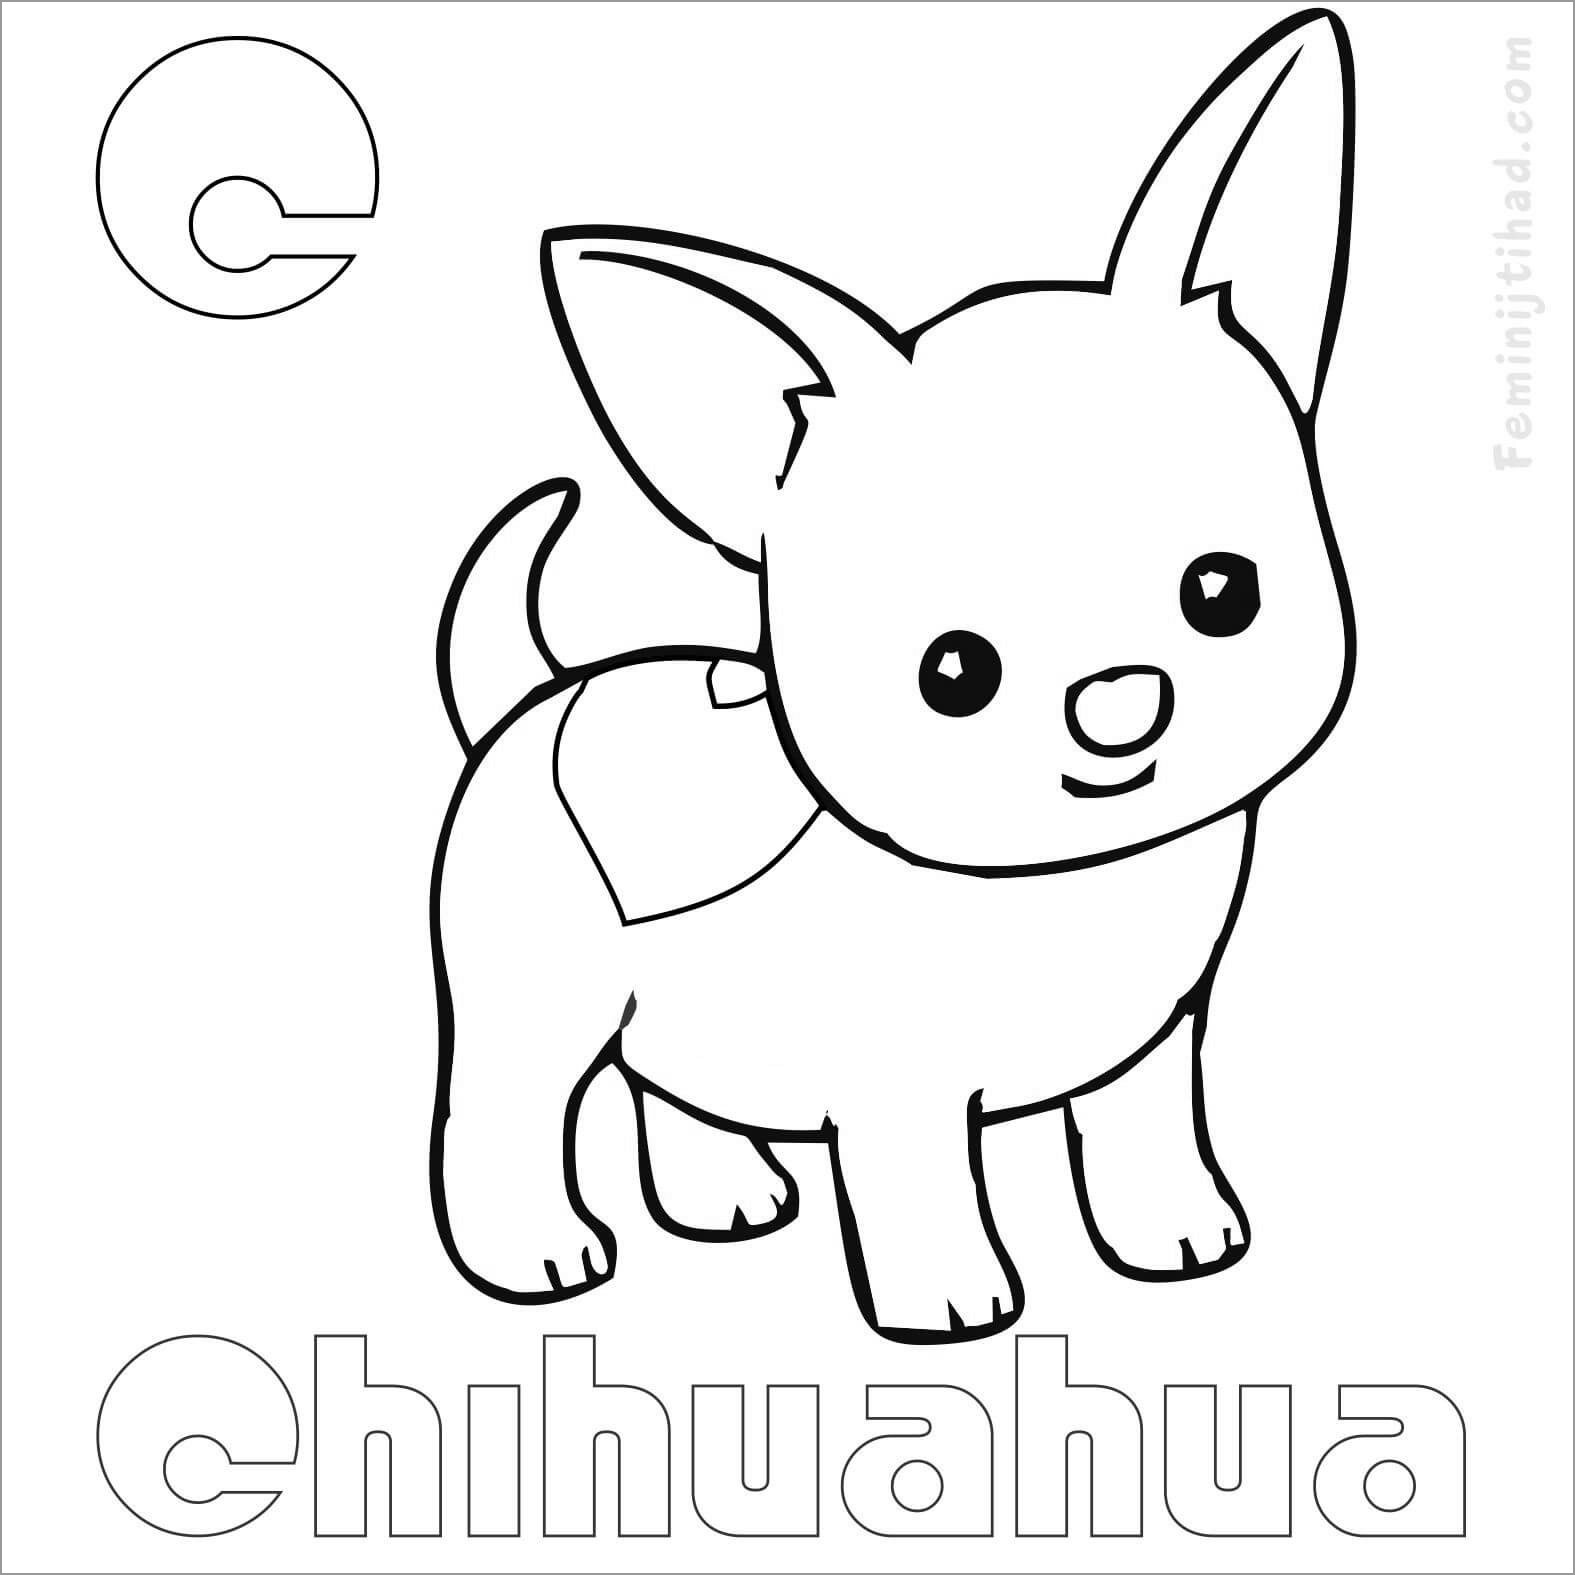 C for Chihuahua Coloring Page